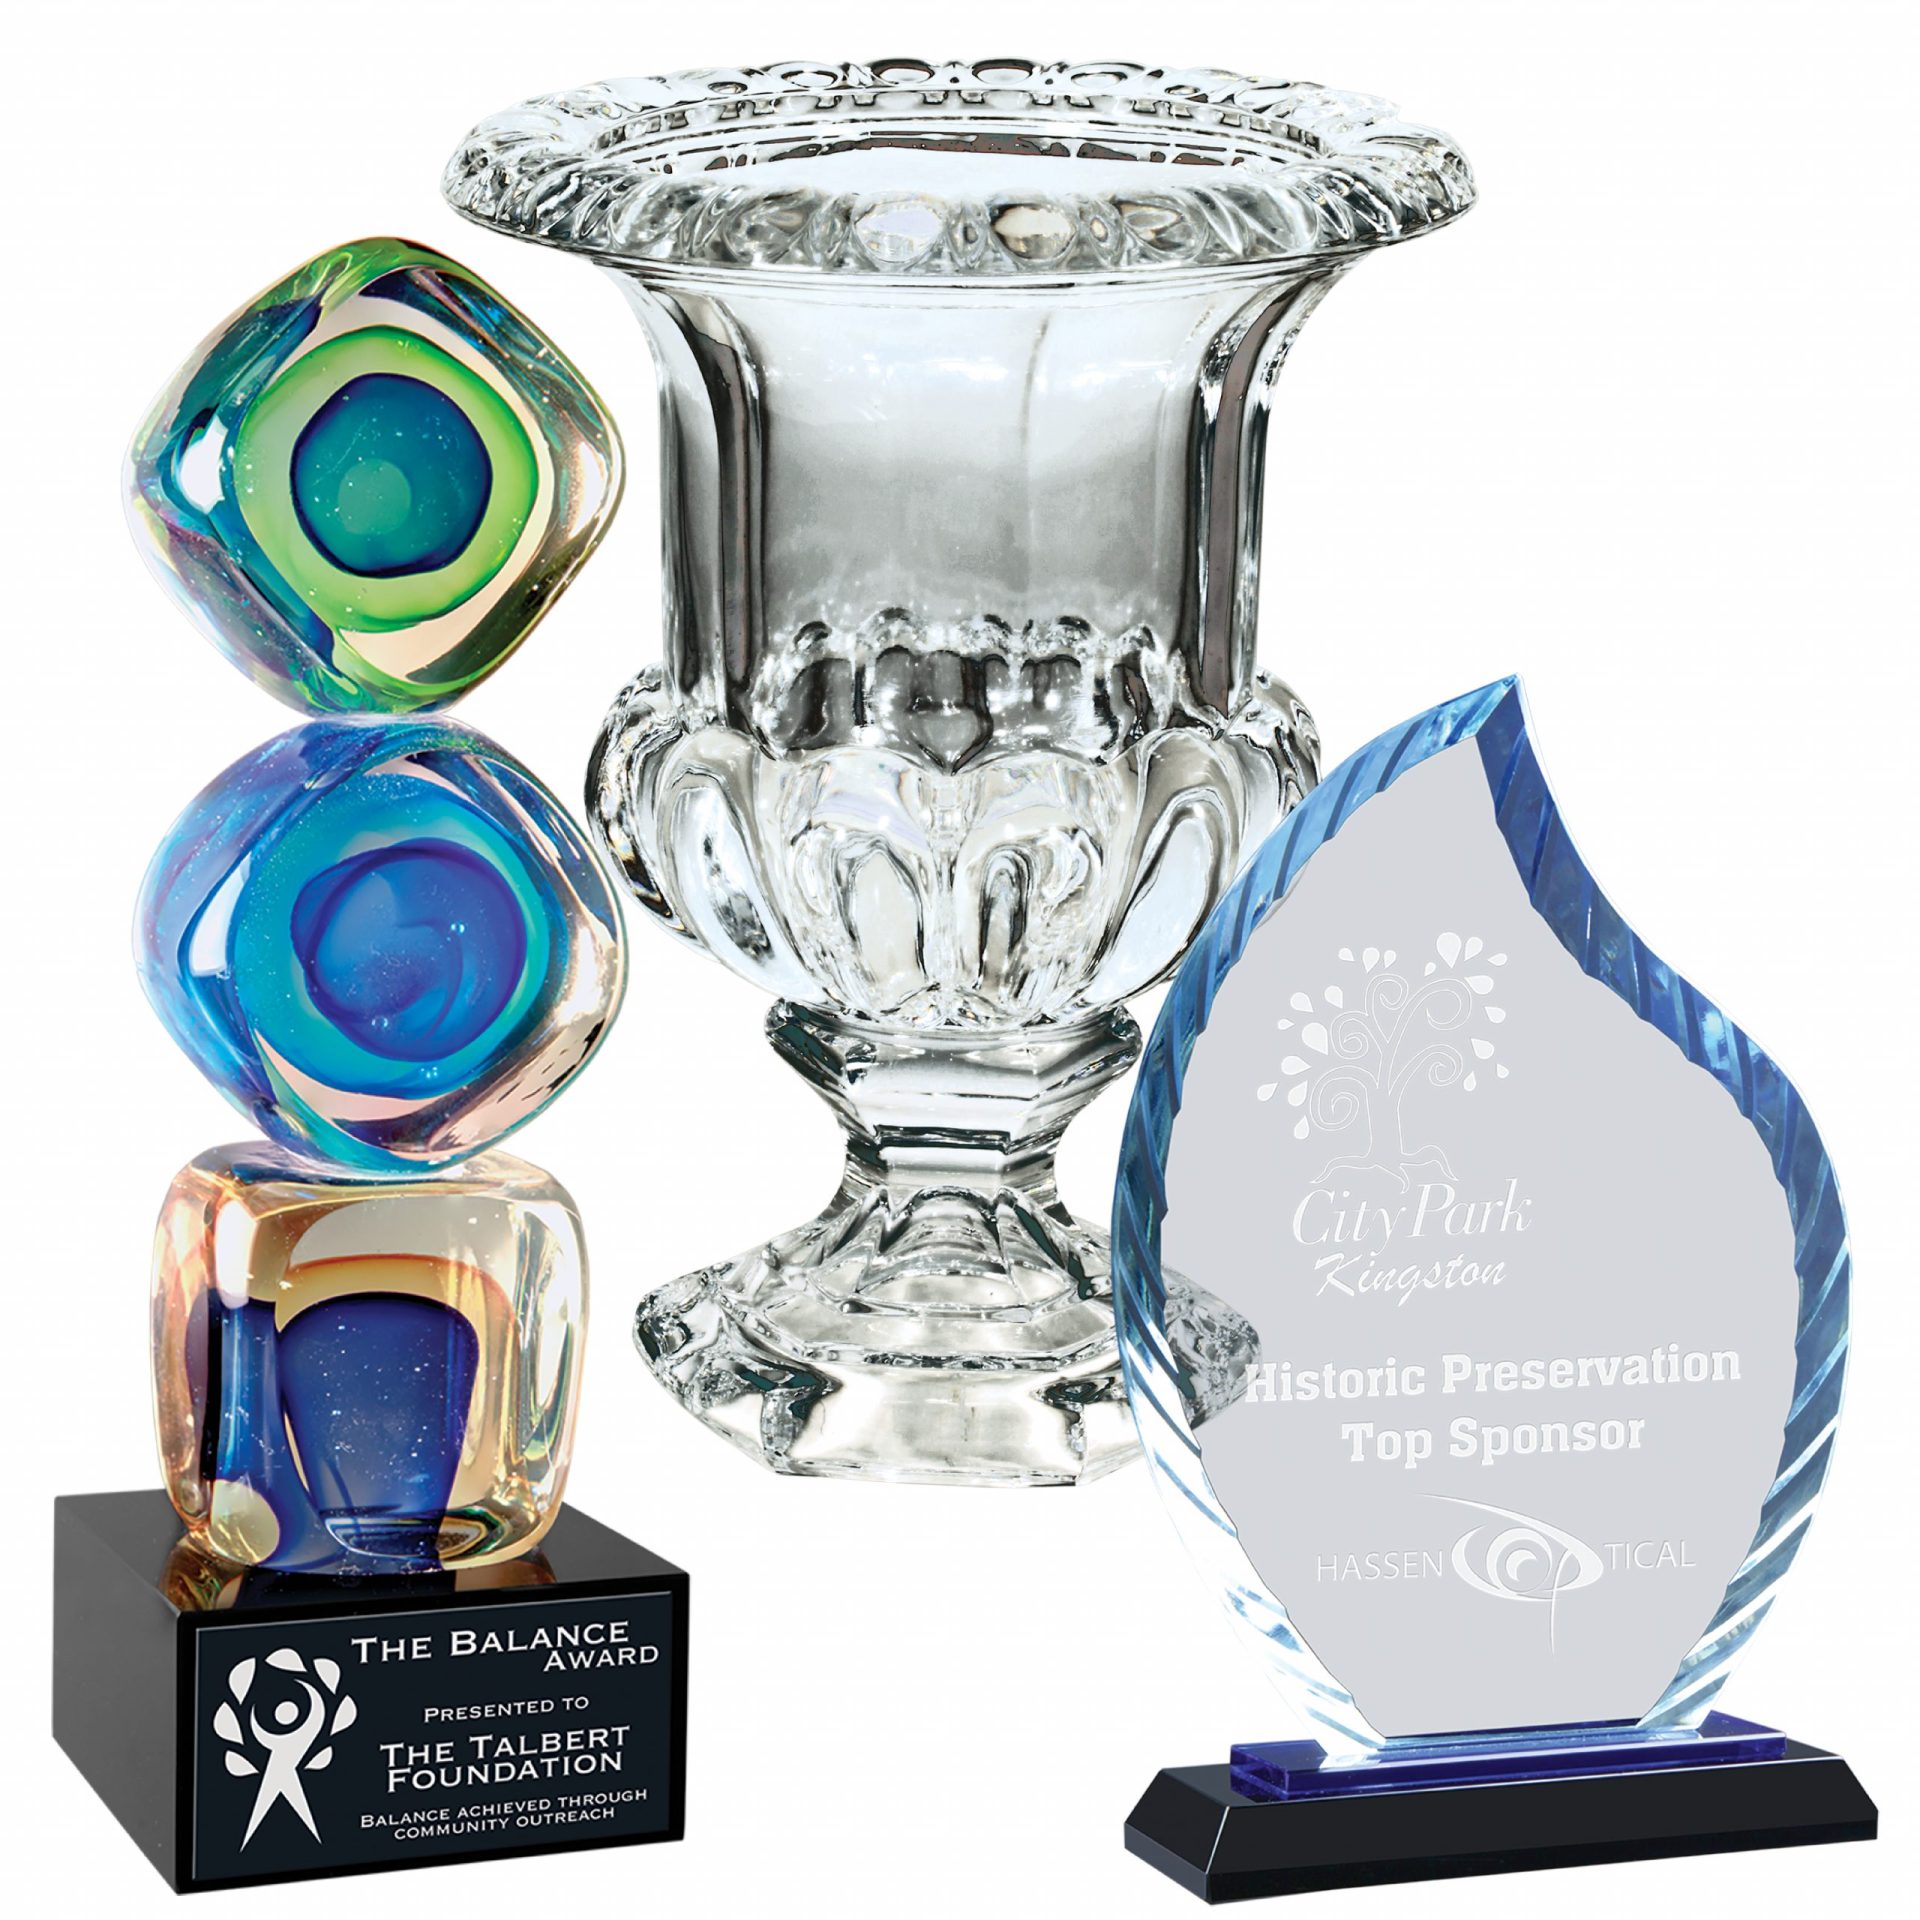 Examples of glass and crystal awards